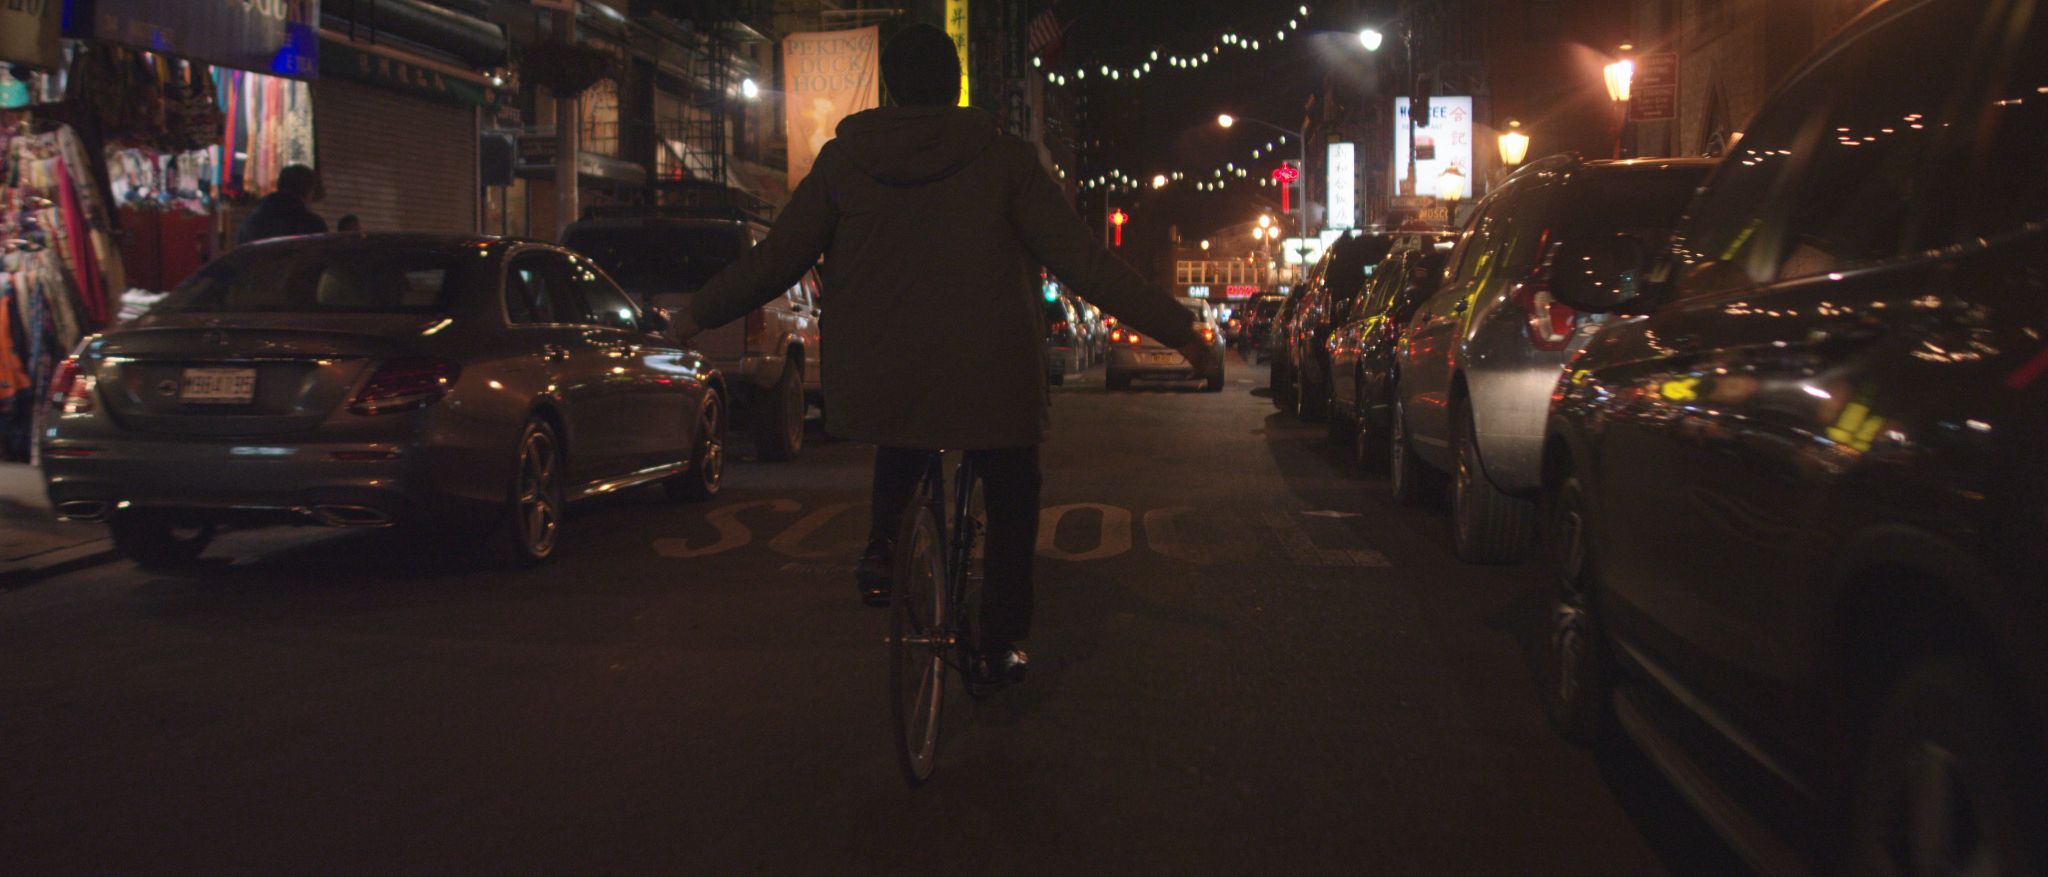 How CI Studios Uses Video and Film to Tell Great Stories and Why We Love Storytelling View from behind of a man biking through the street lined with cars at night with arms outstretched